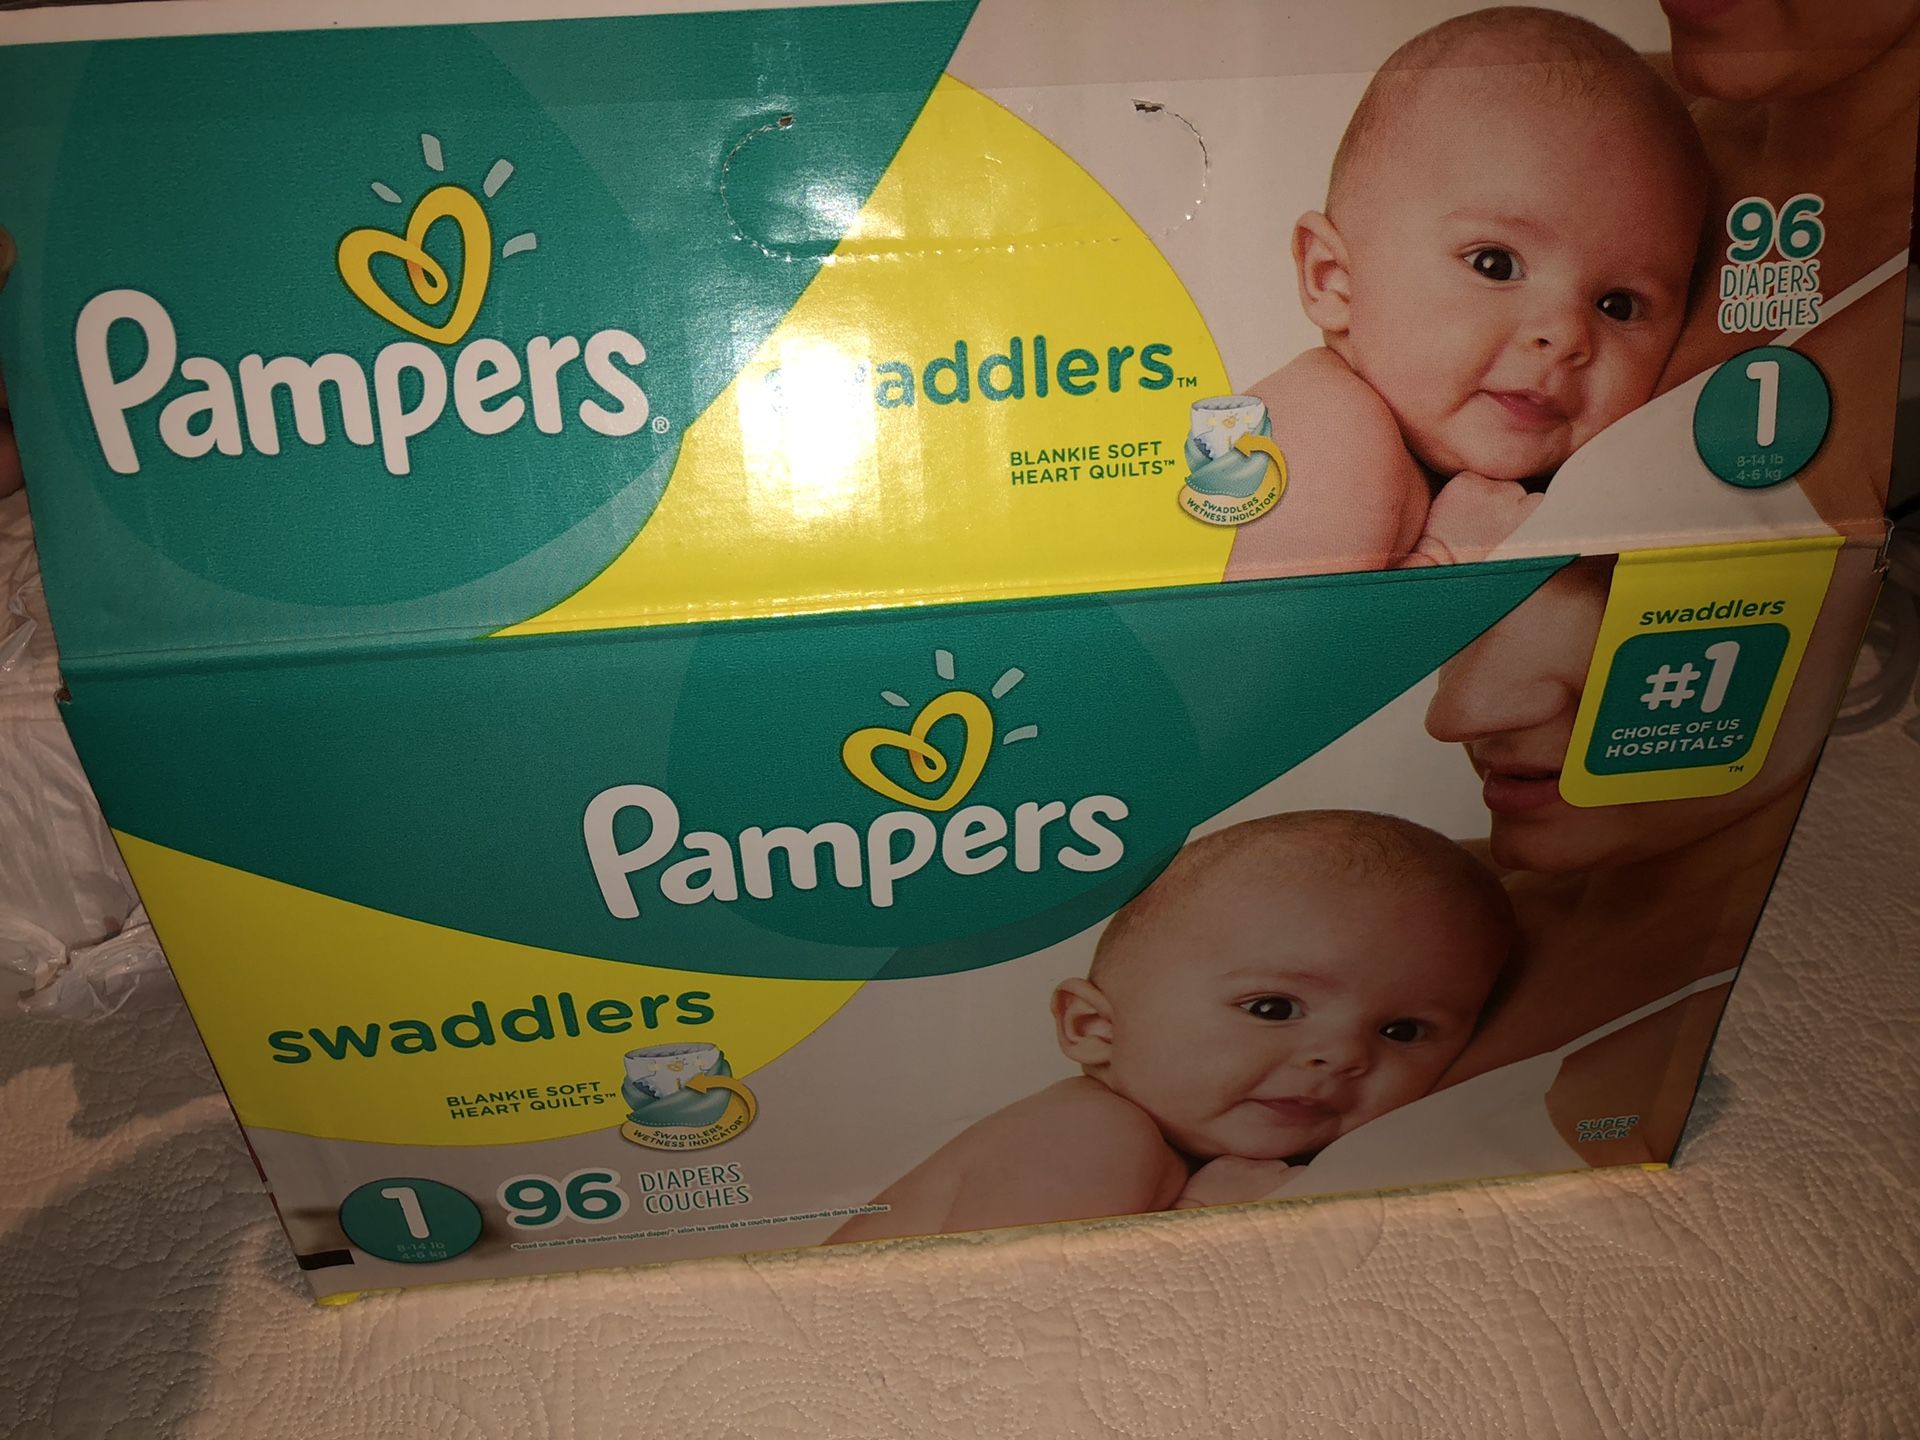 Size 1 diapers (PAMPERS)